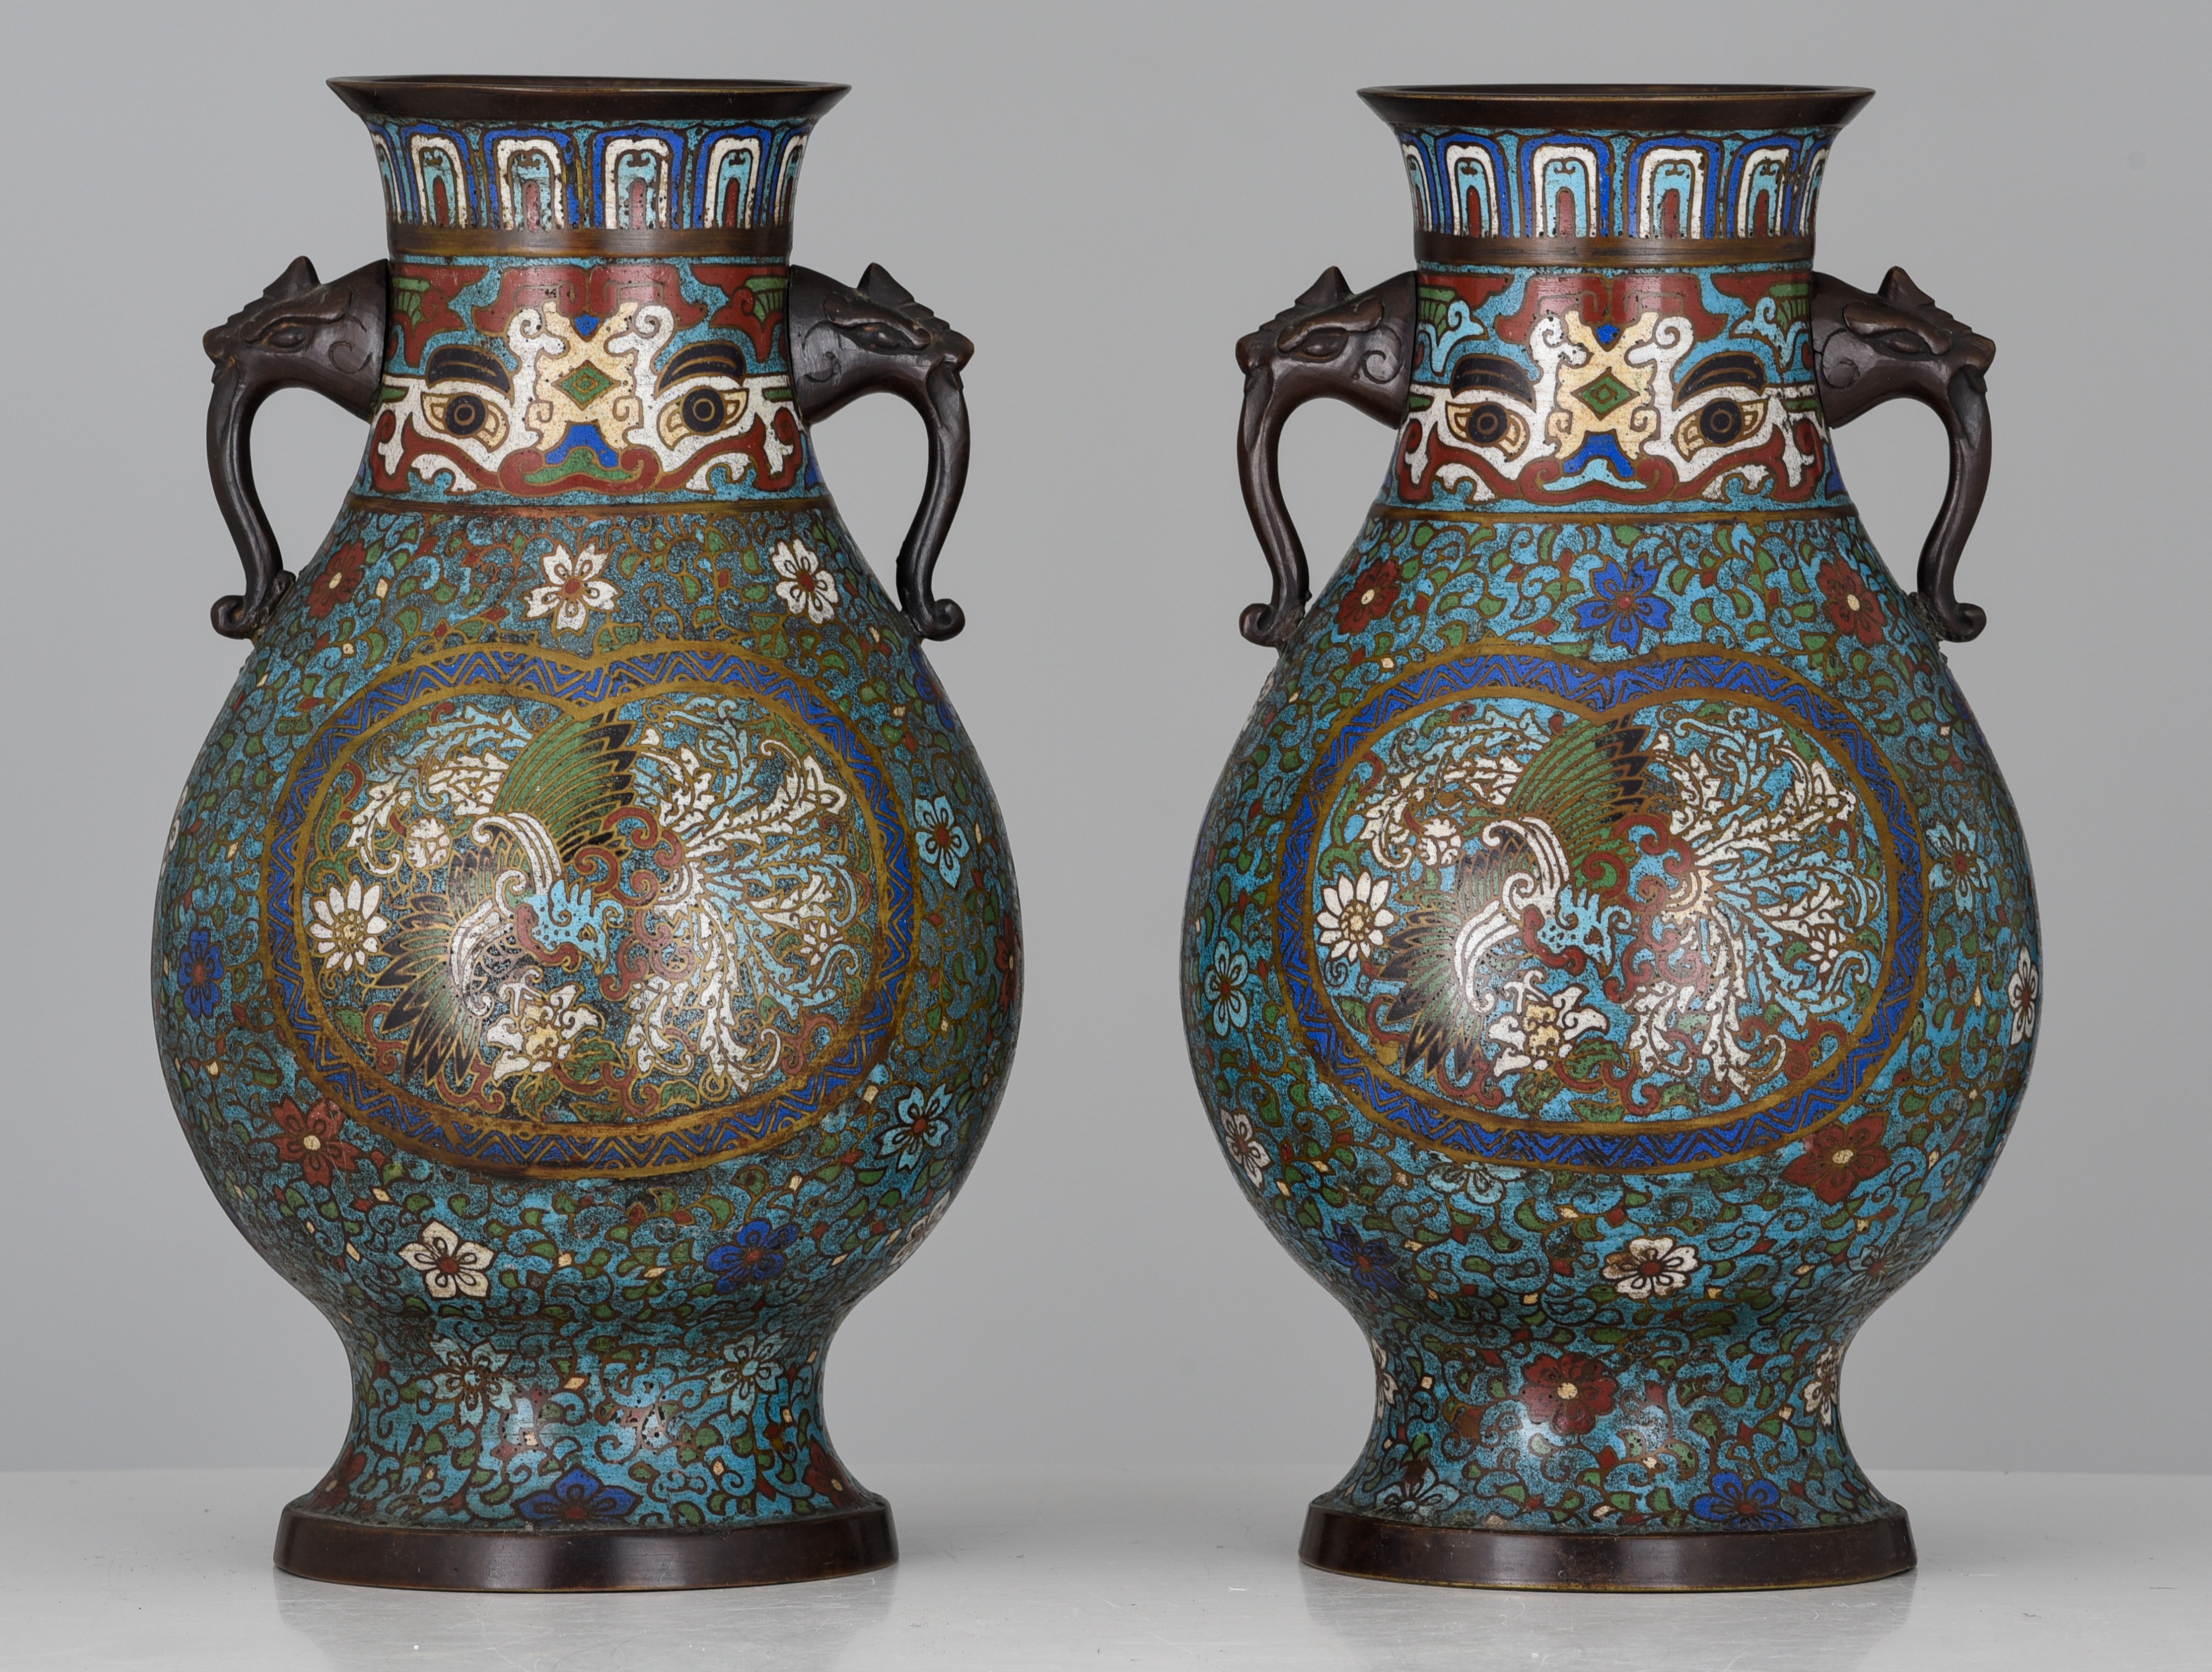 A pair of Japanese champleve bronze vases, 19thC/20thC, H 36 cm - Image 2 of 7